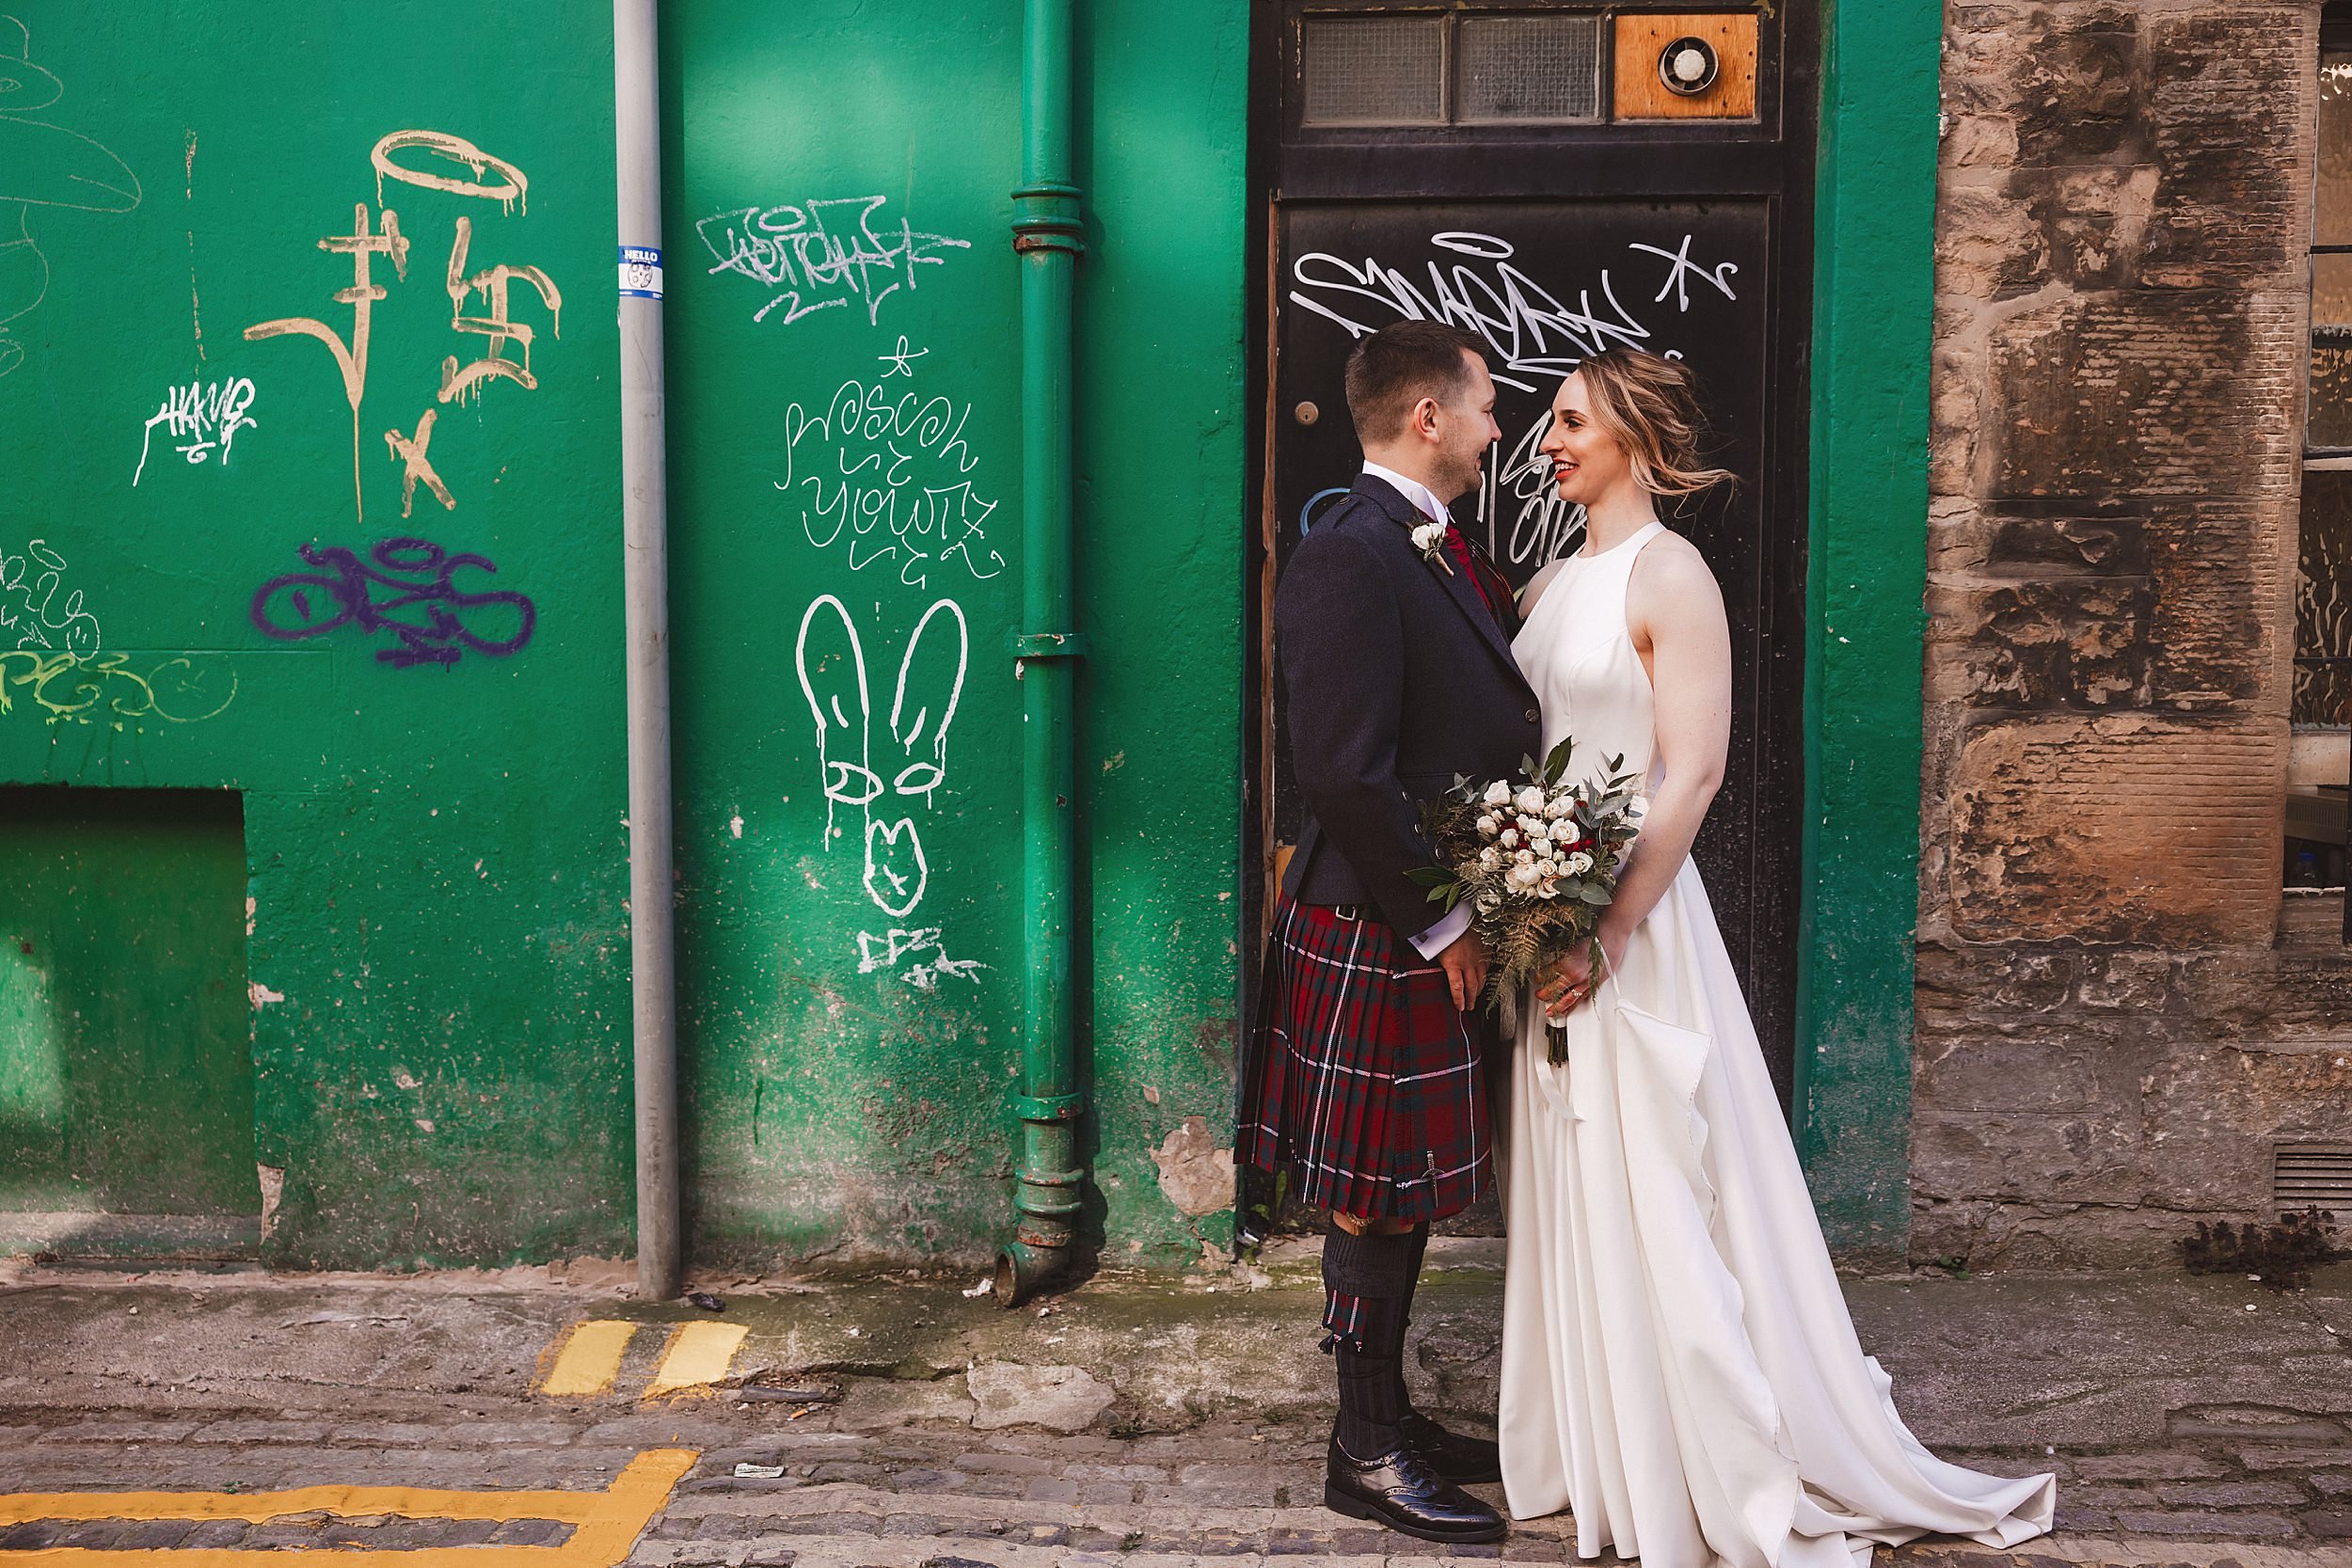 editorial shot of the bride and groom facing each other standing in an edinburgh street in front of a graffitied wall by documentary wedding photographer edinburgh